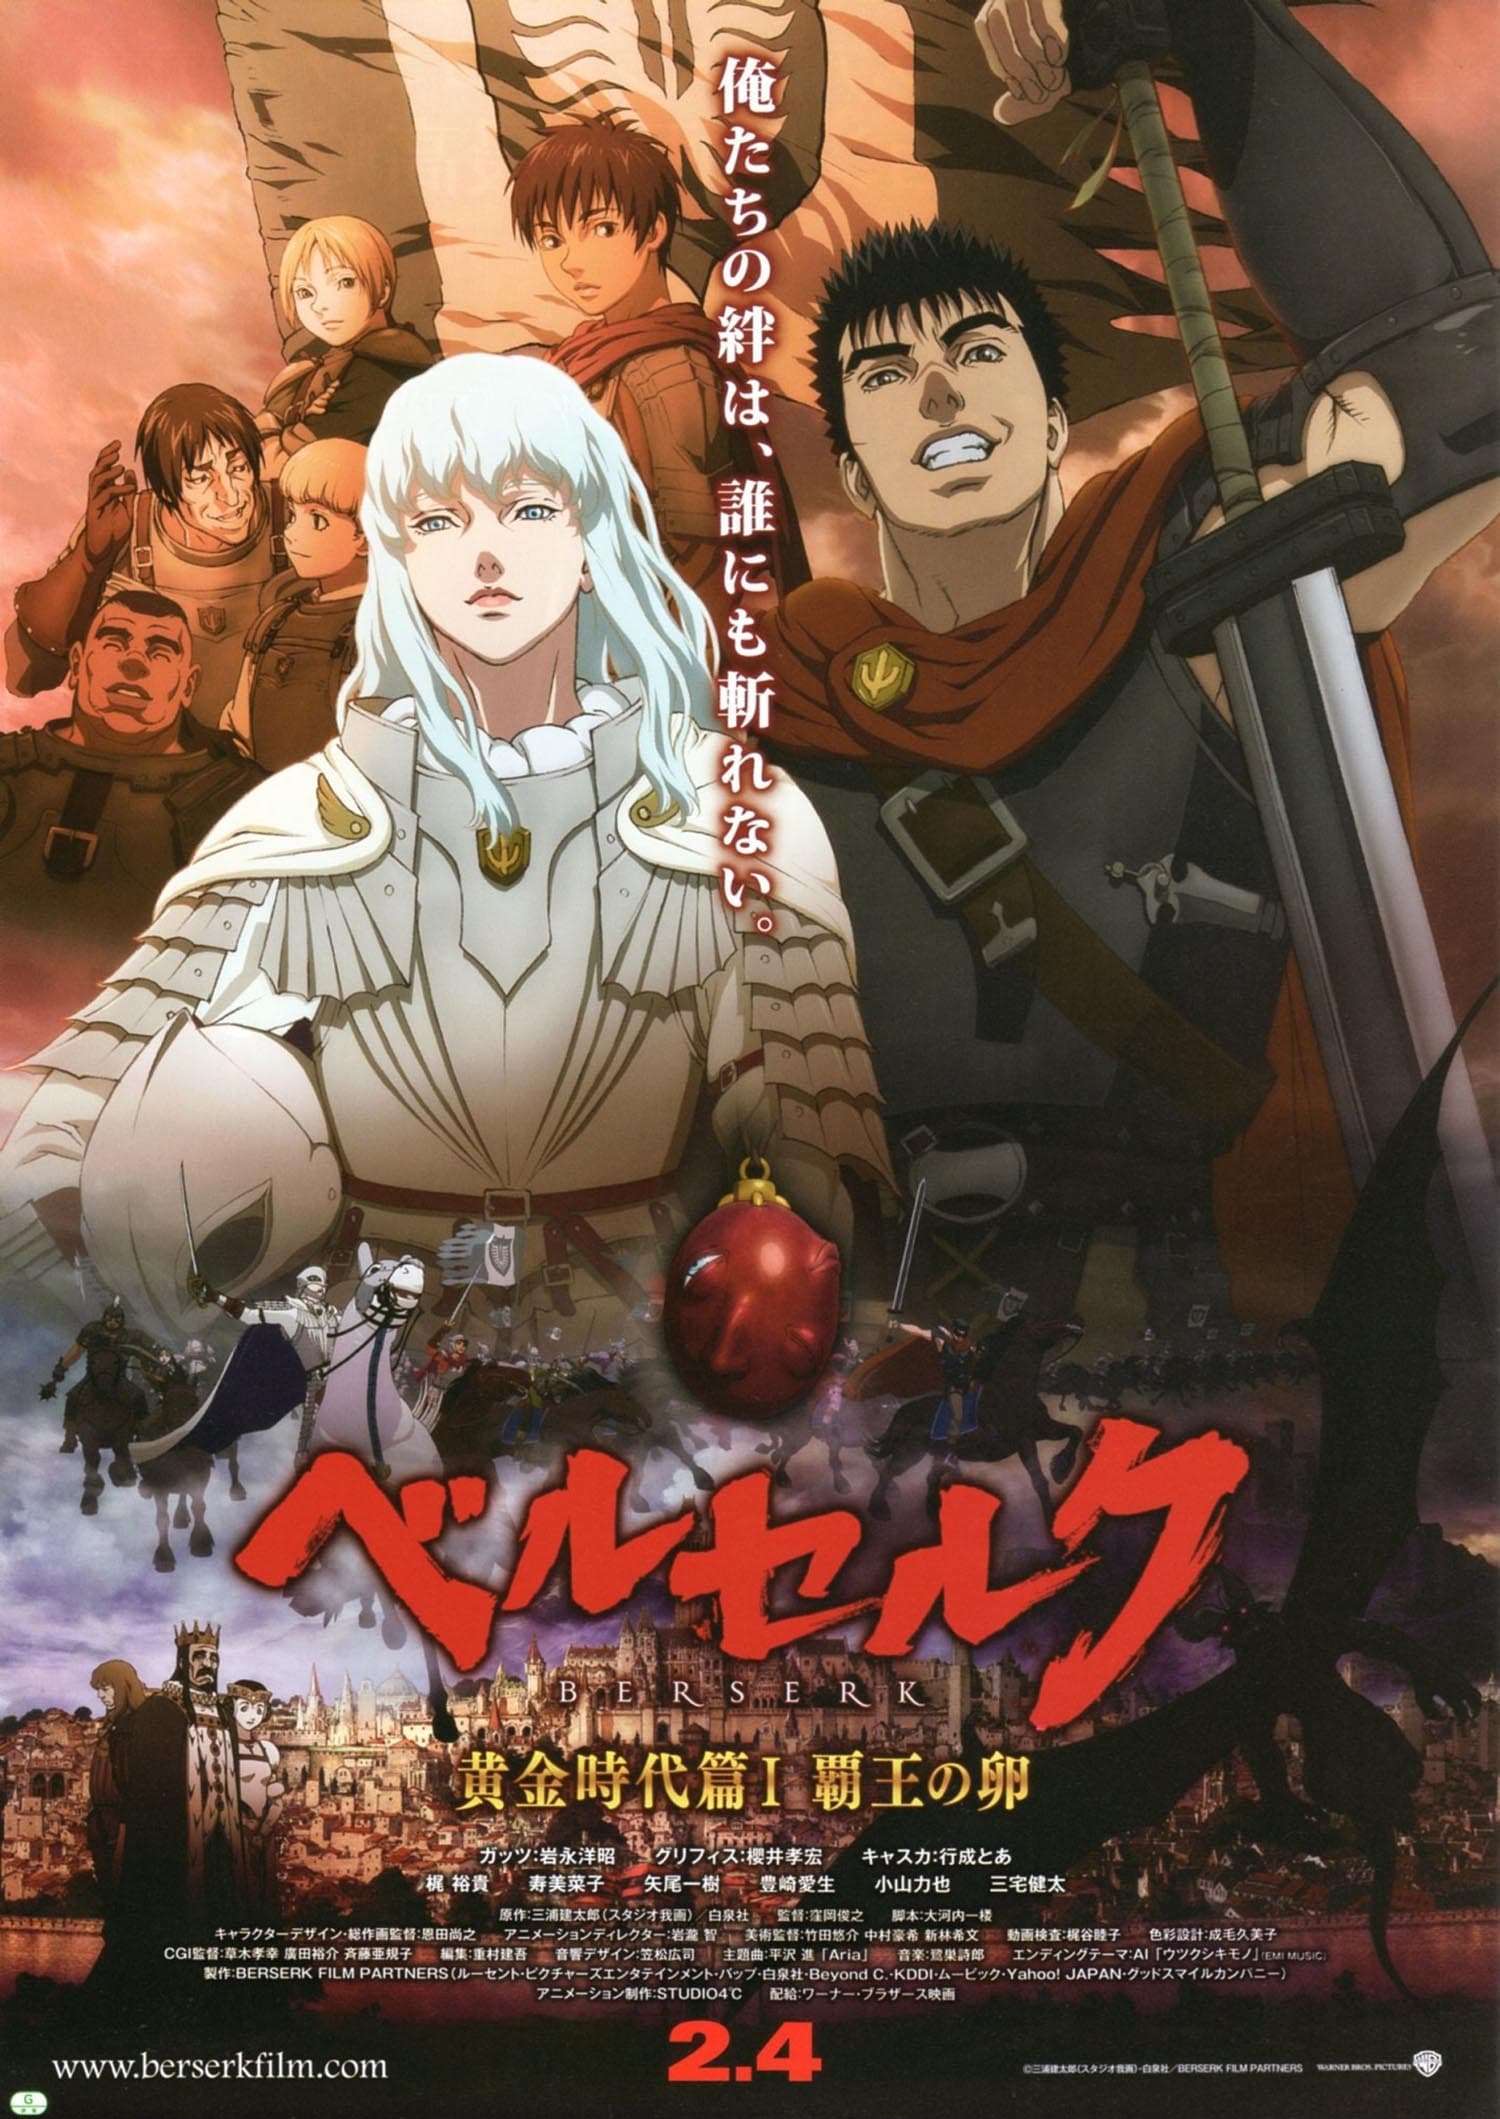 Banner Phim Berserk: The Golden Age Arc I - The Egg of the King (Berserk: The Golden Age Arc I - The Egg of the King)